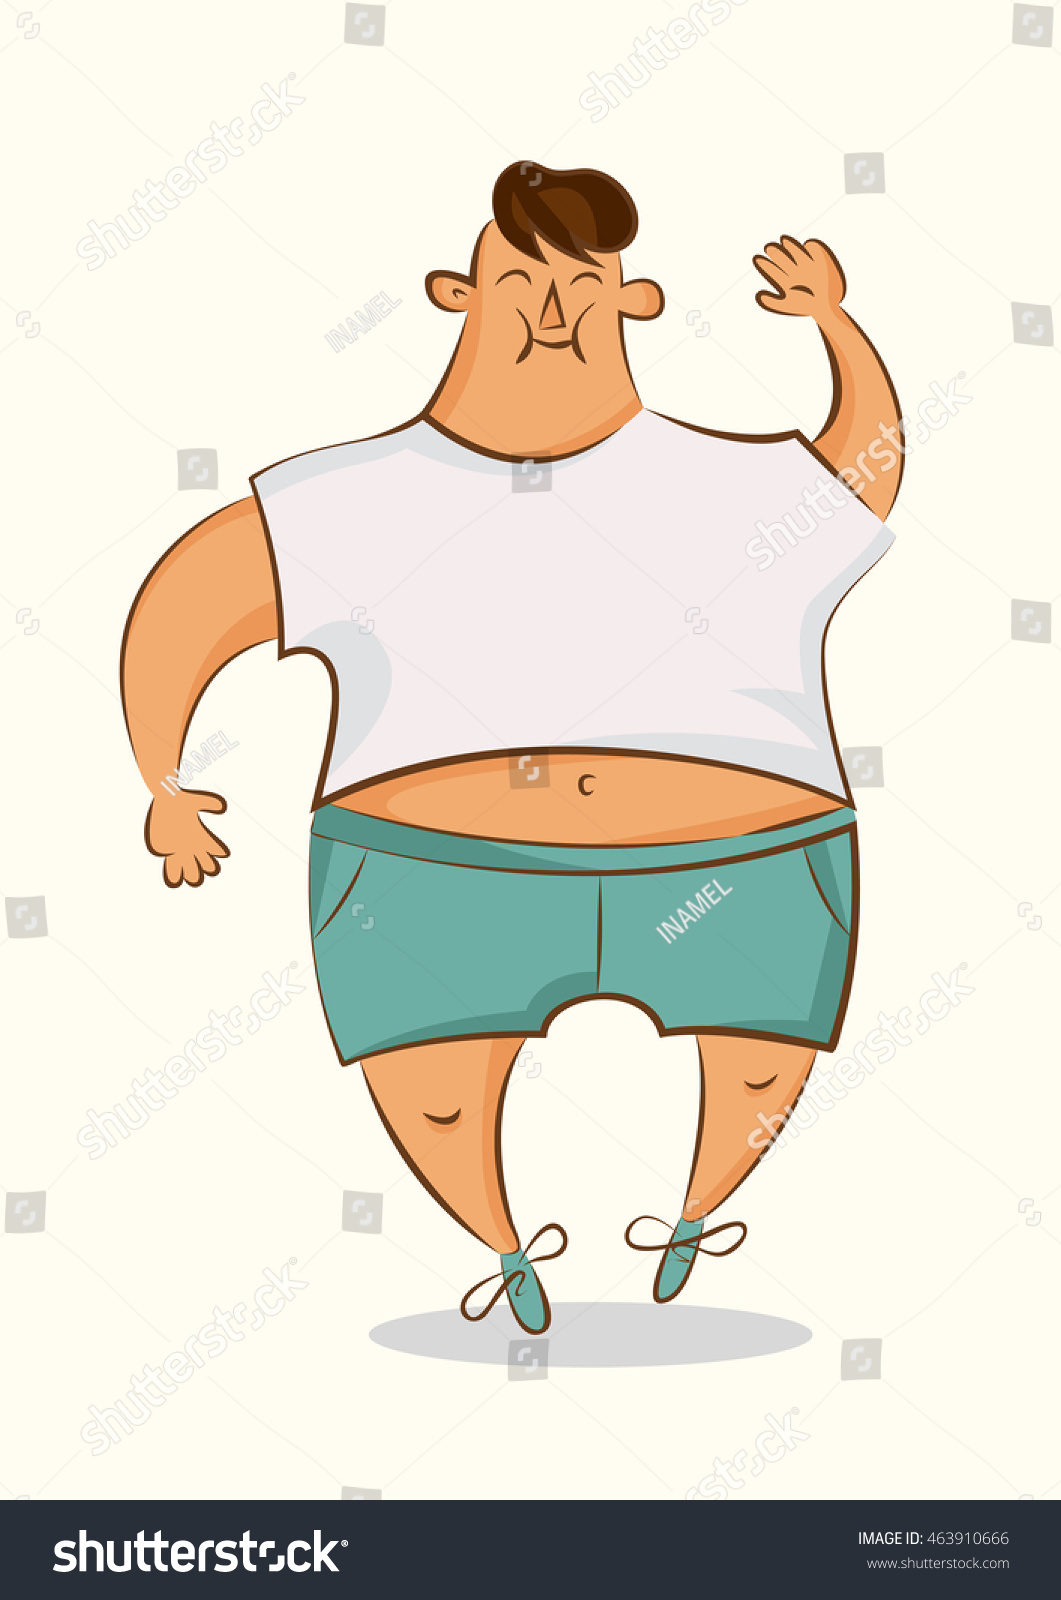 Fat Cartoon Character Boy Overweight Isolated Stock Vector 463910666